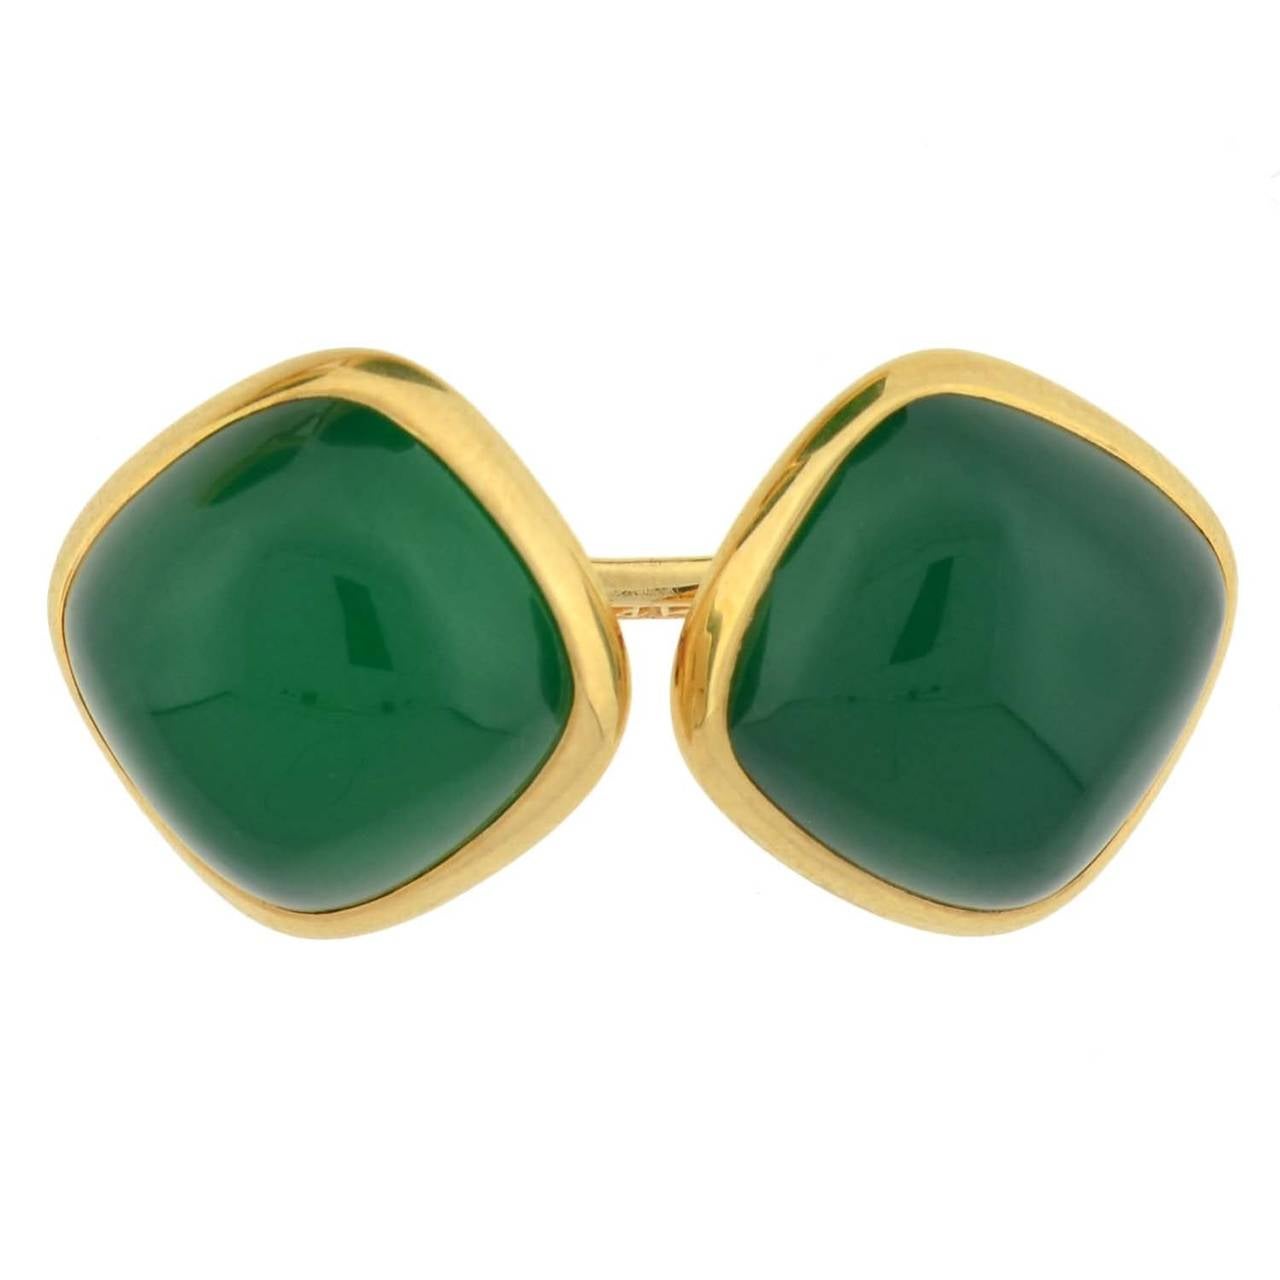 An exceptional pair of Larter & Sons cufflinks from the late Art Deco (ca1930's) era! Crafted in 14kt yellow gold, each of these double-sided cufflinks has a rounded square face with a vibrant chrysoprase stone set in the center. The luscious green